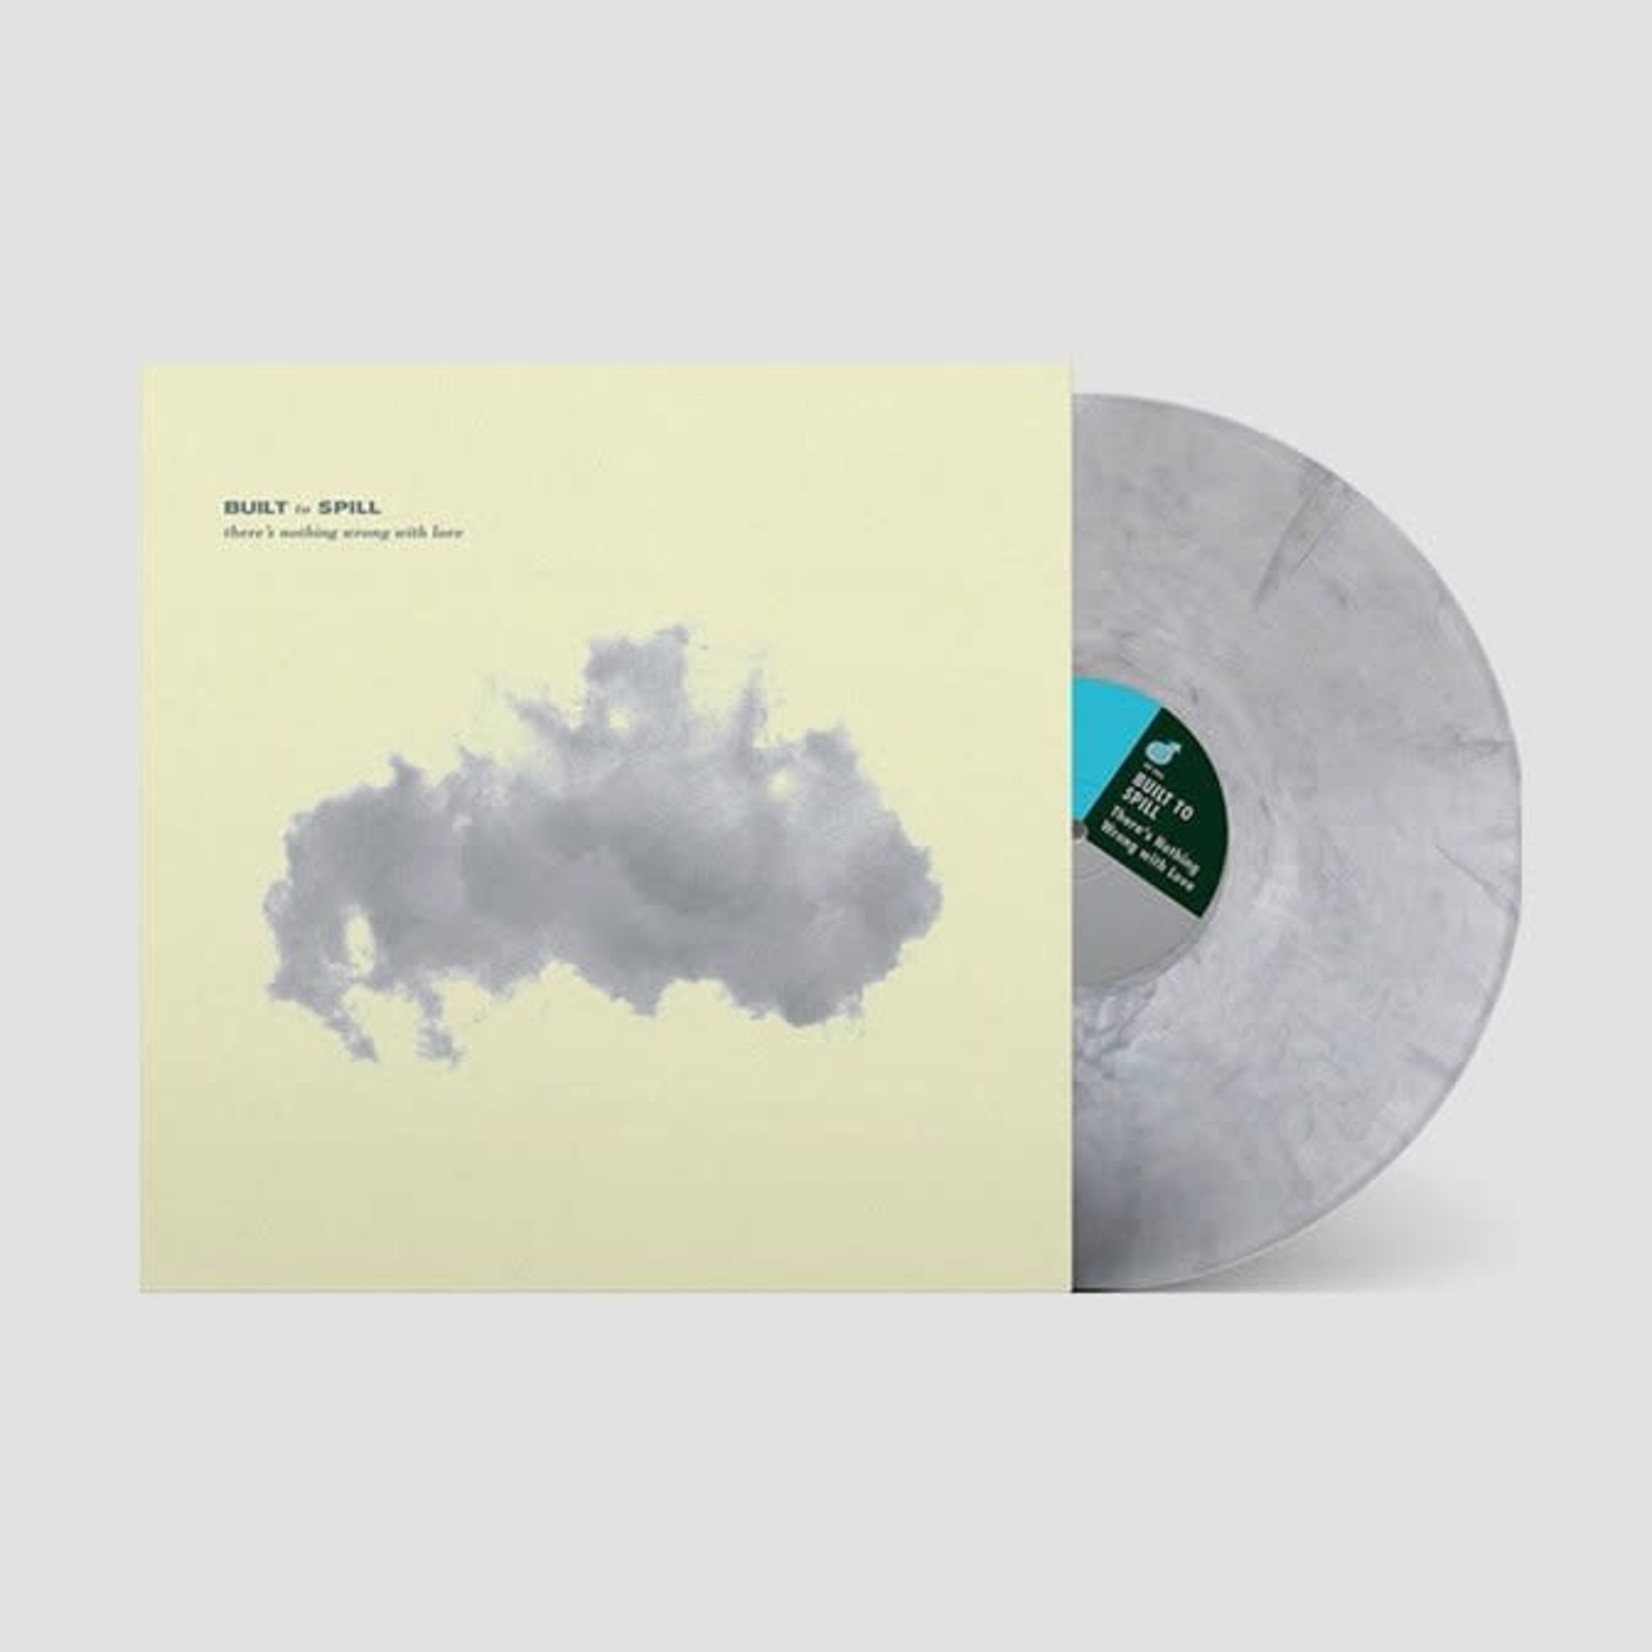 [New] Built To Spill - There's Nothing Wrong With Love (RSD Essentials, silver vinyl)